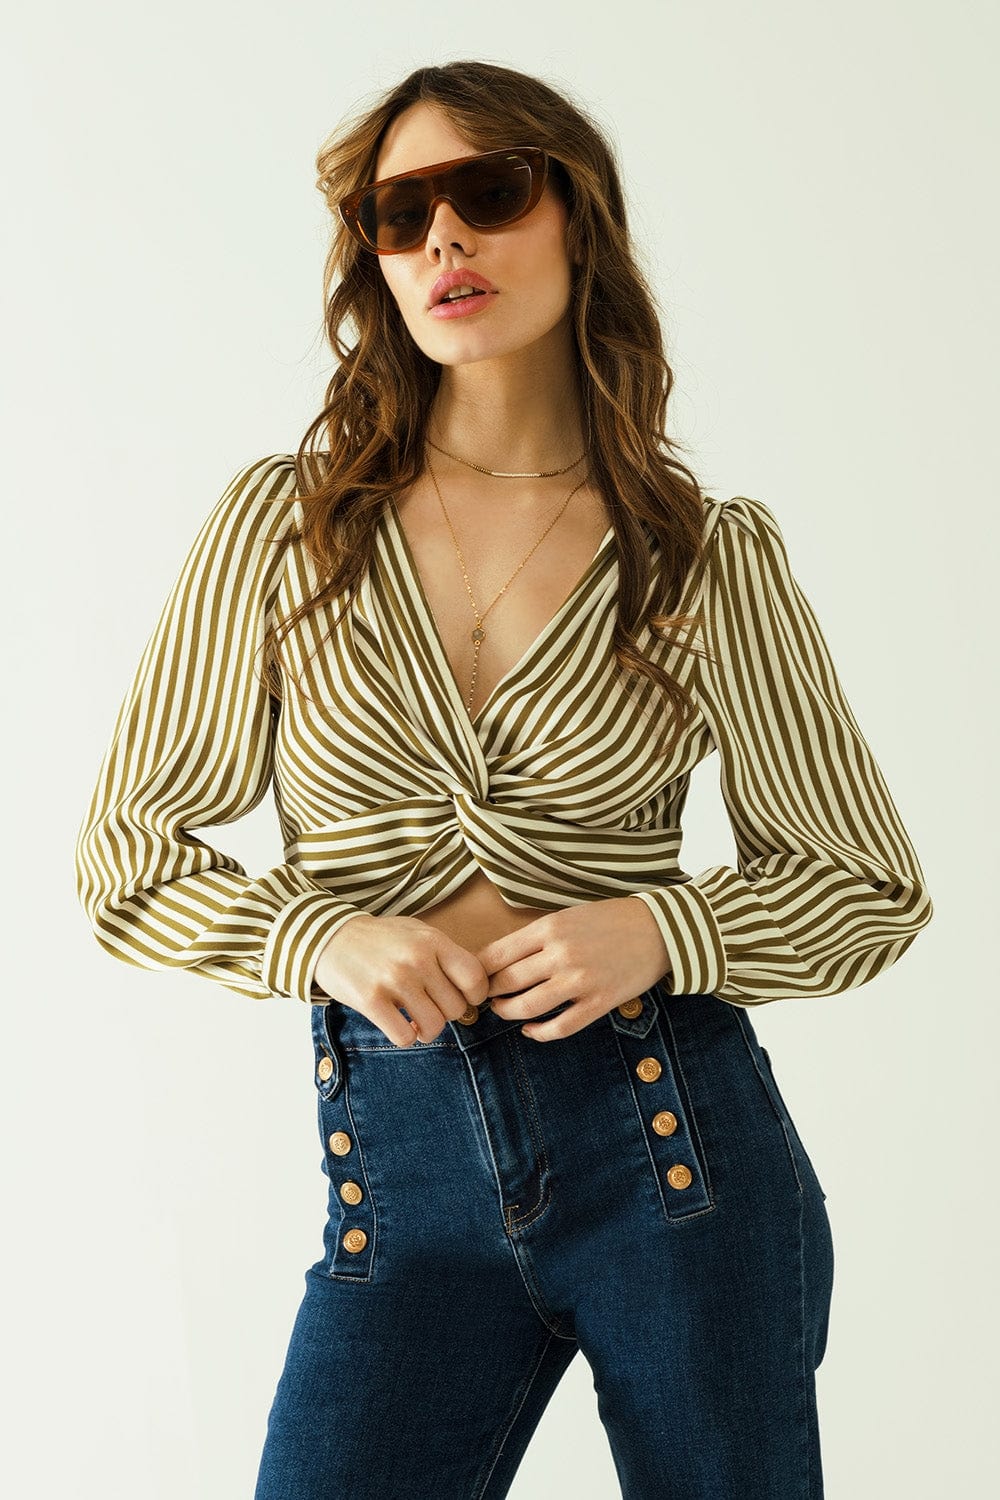 Q2 Women's Blouse White Long Sleeves Crop Top With Brown Stripes And V-Neck